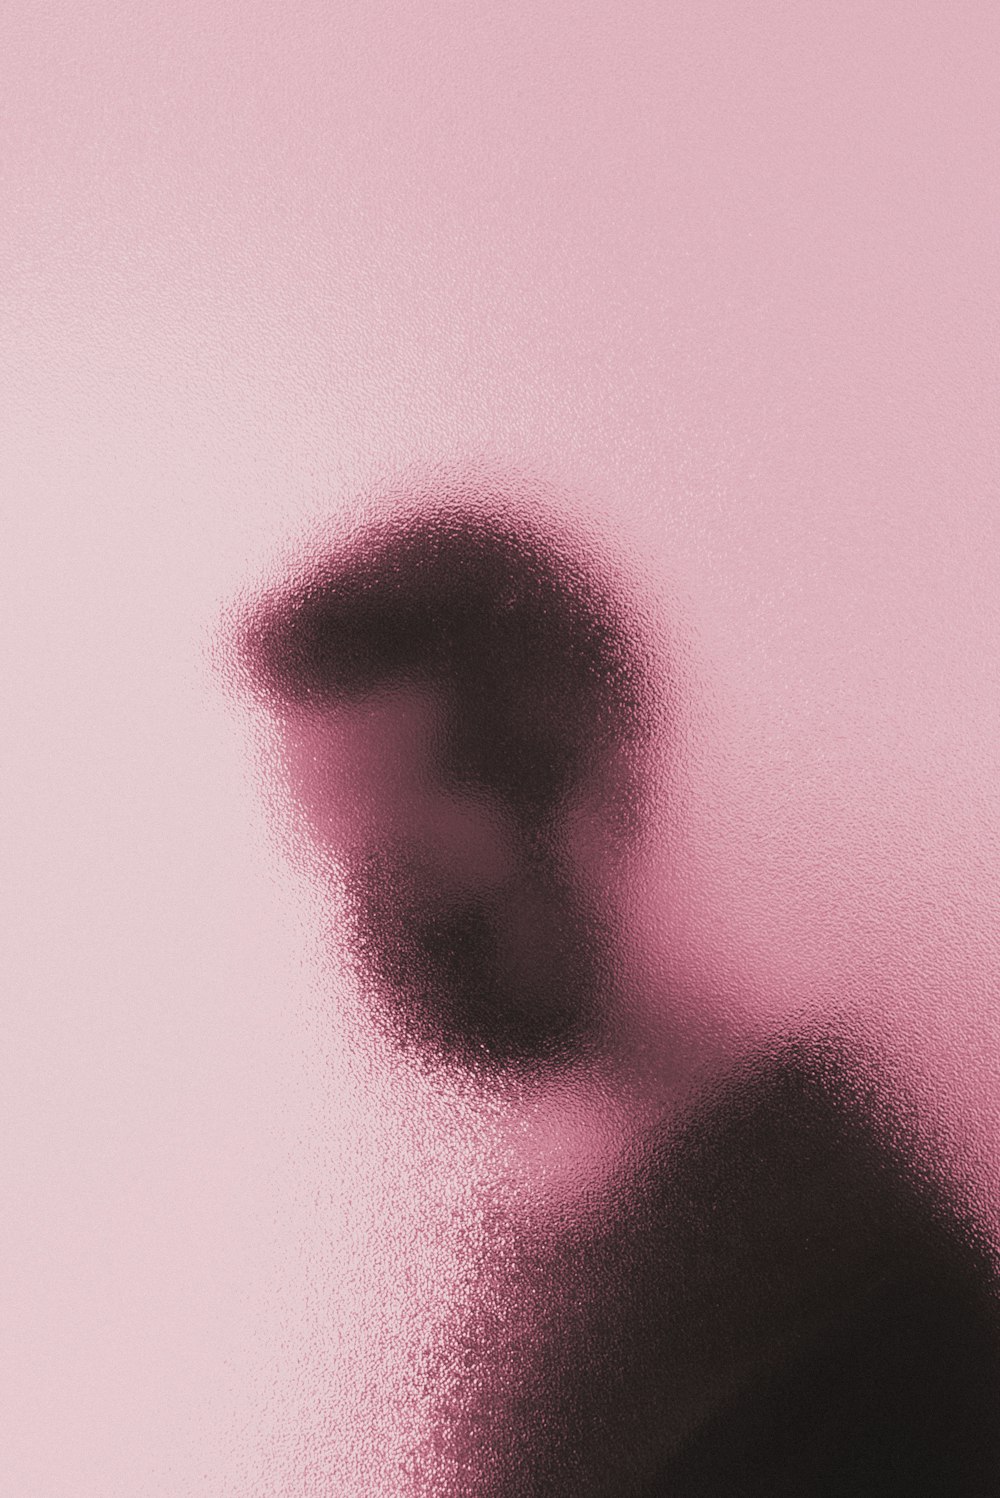 a blurry image of a person's face on a pink background